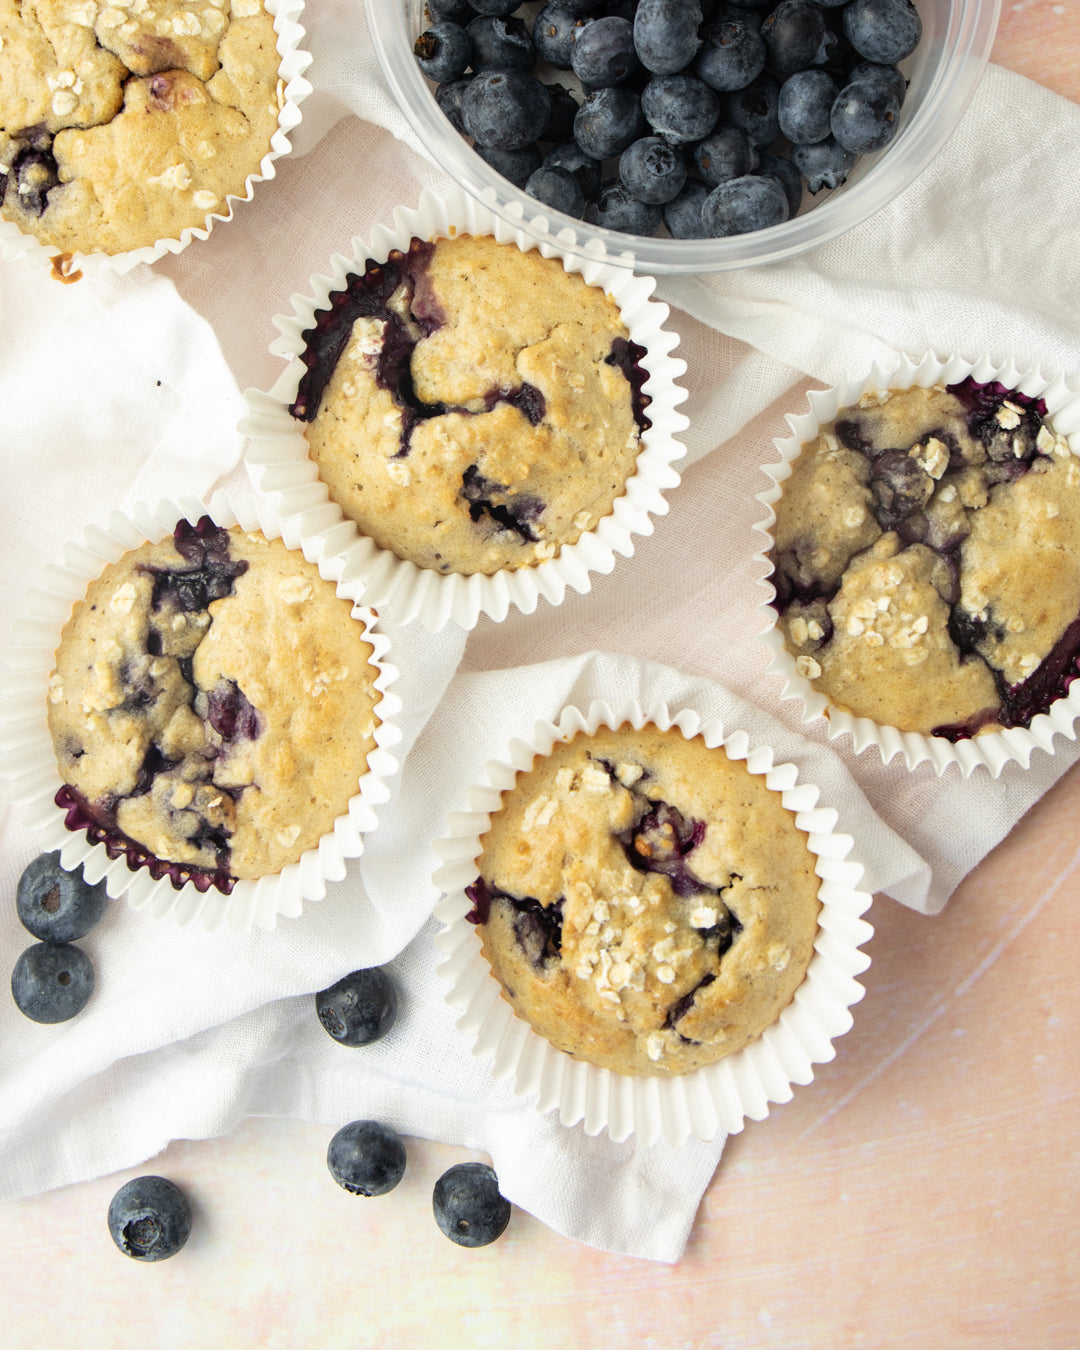 Apple blueberry oat muffins